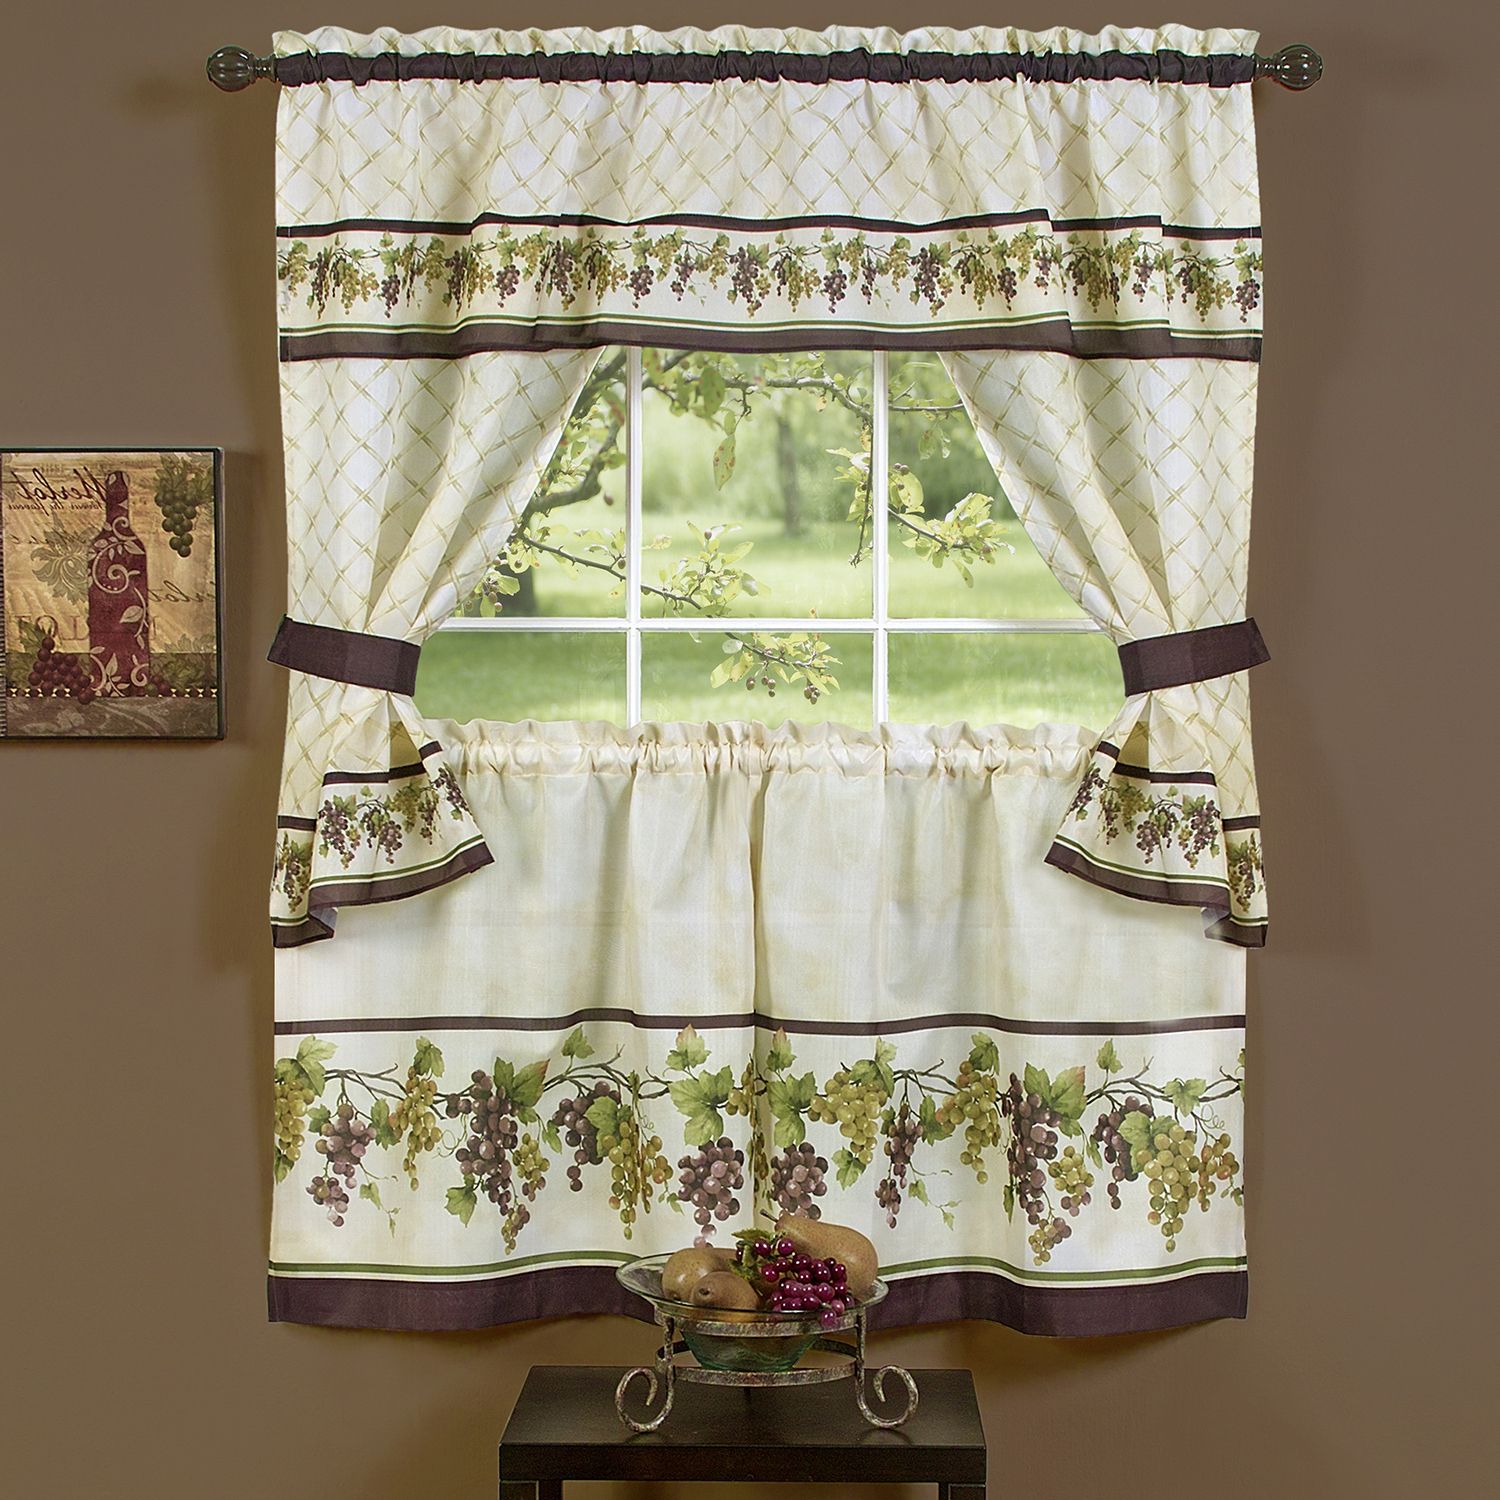 Featured Photo of Complete Cottage Curtain Sets With An Antique And Aubergine Grapvine Print